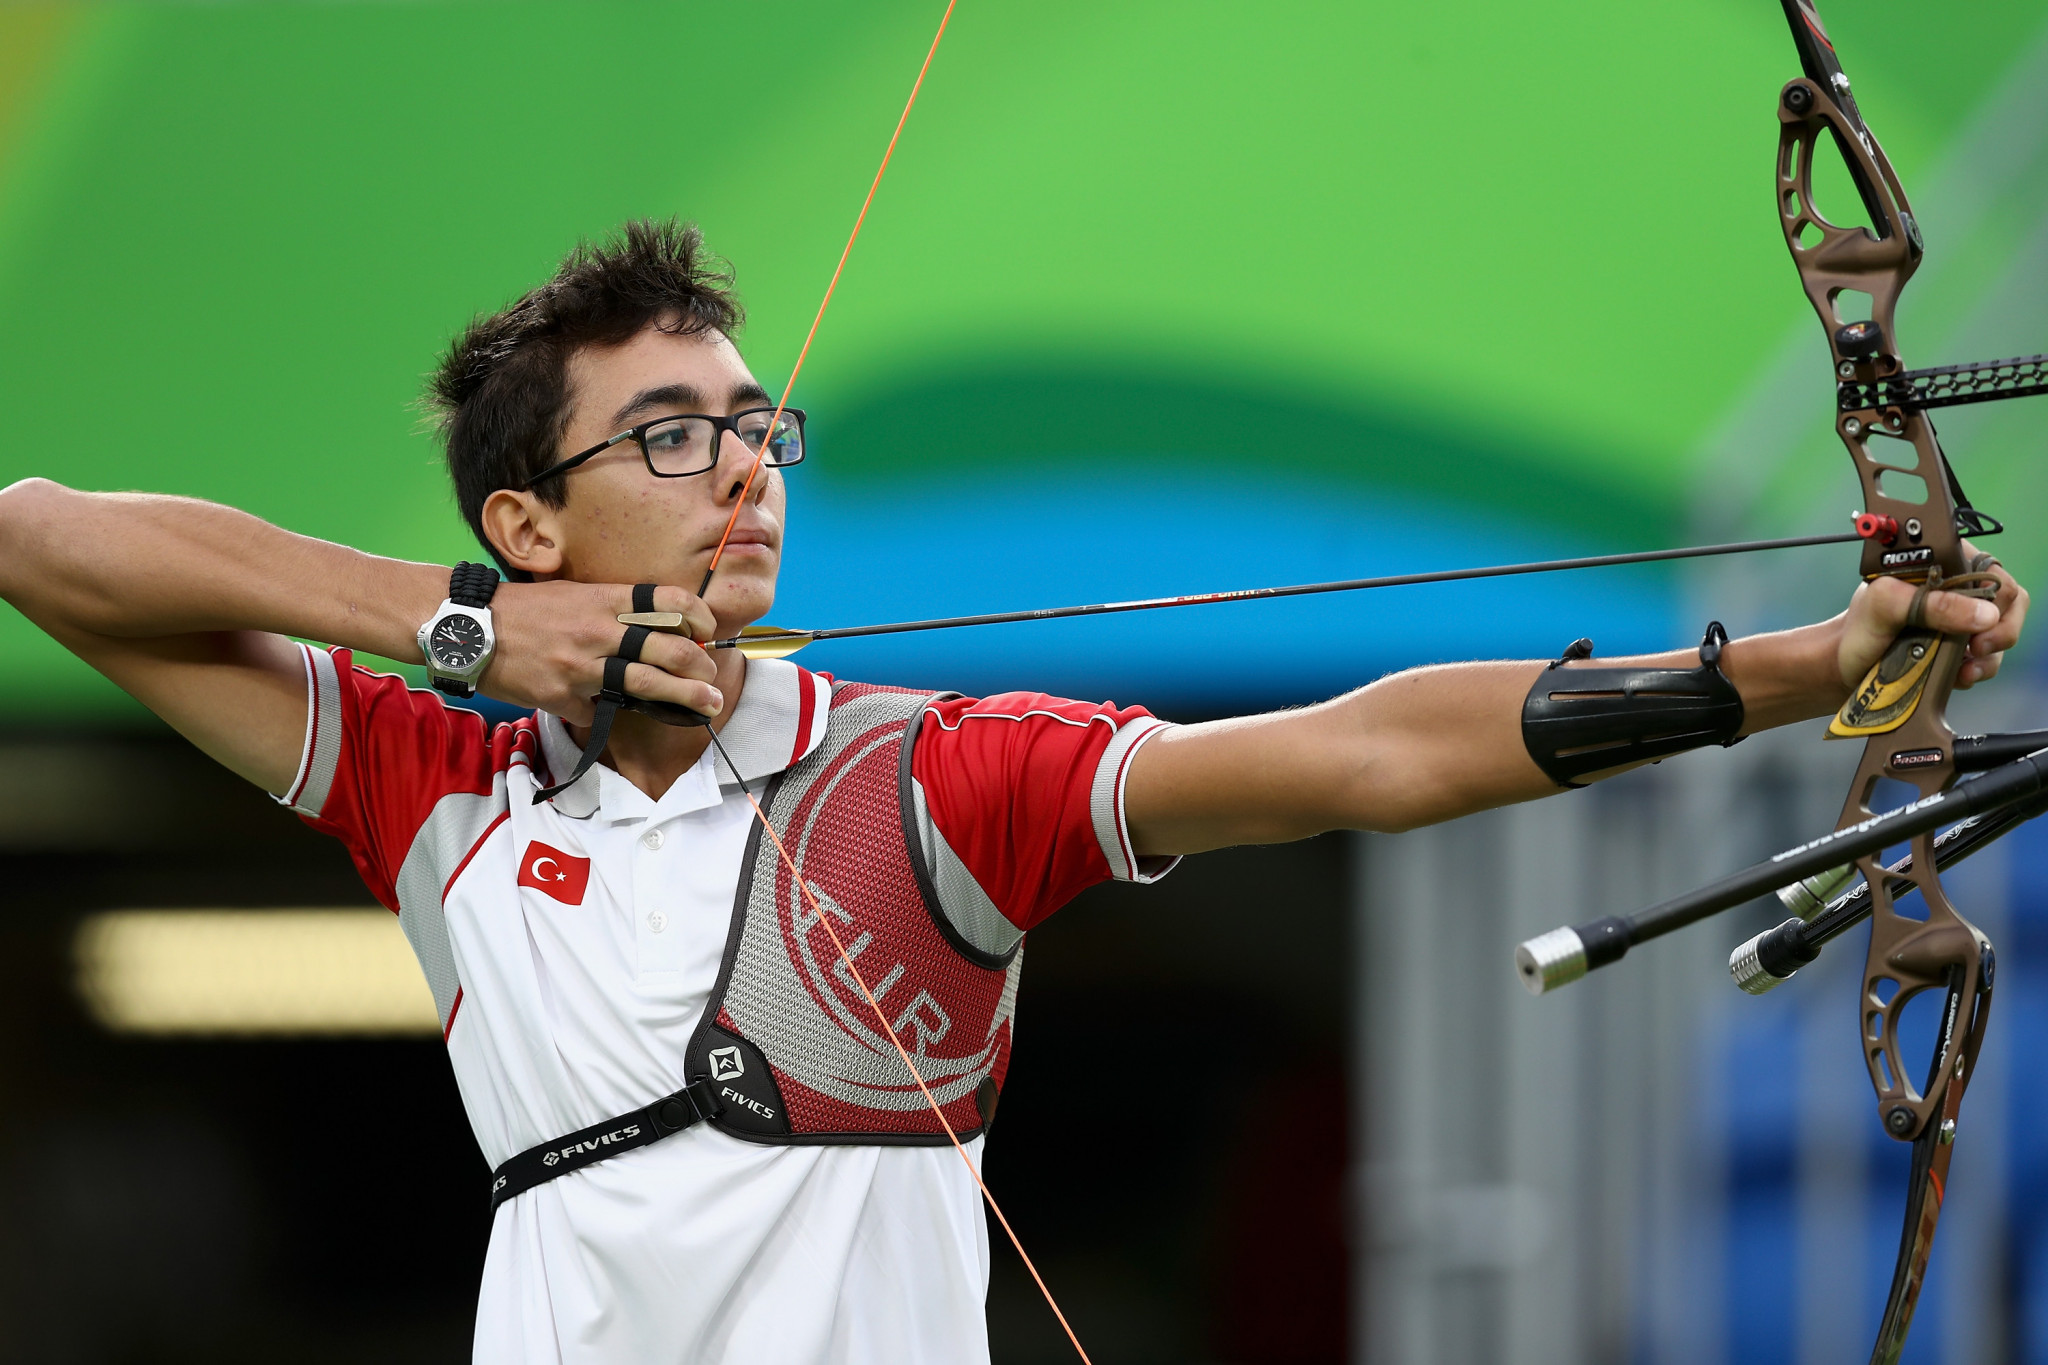 Mete Gazoz, the top men's recurve qualifier, has made it to the final ©Getty Images